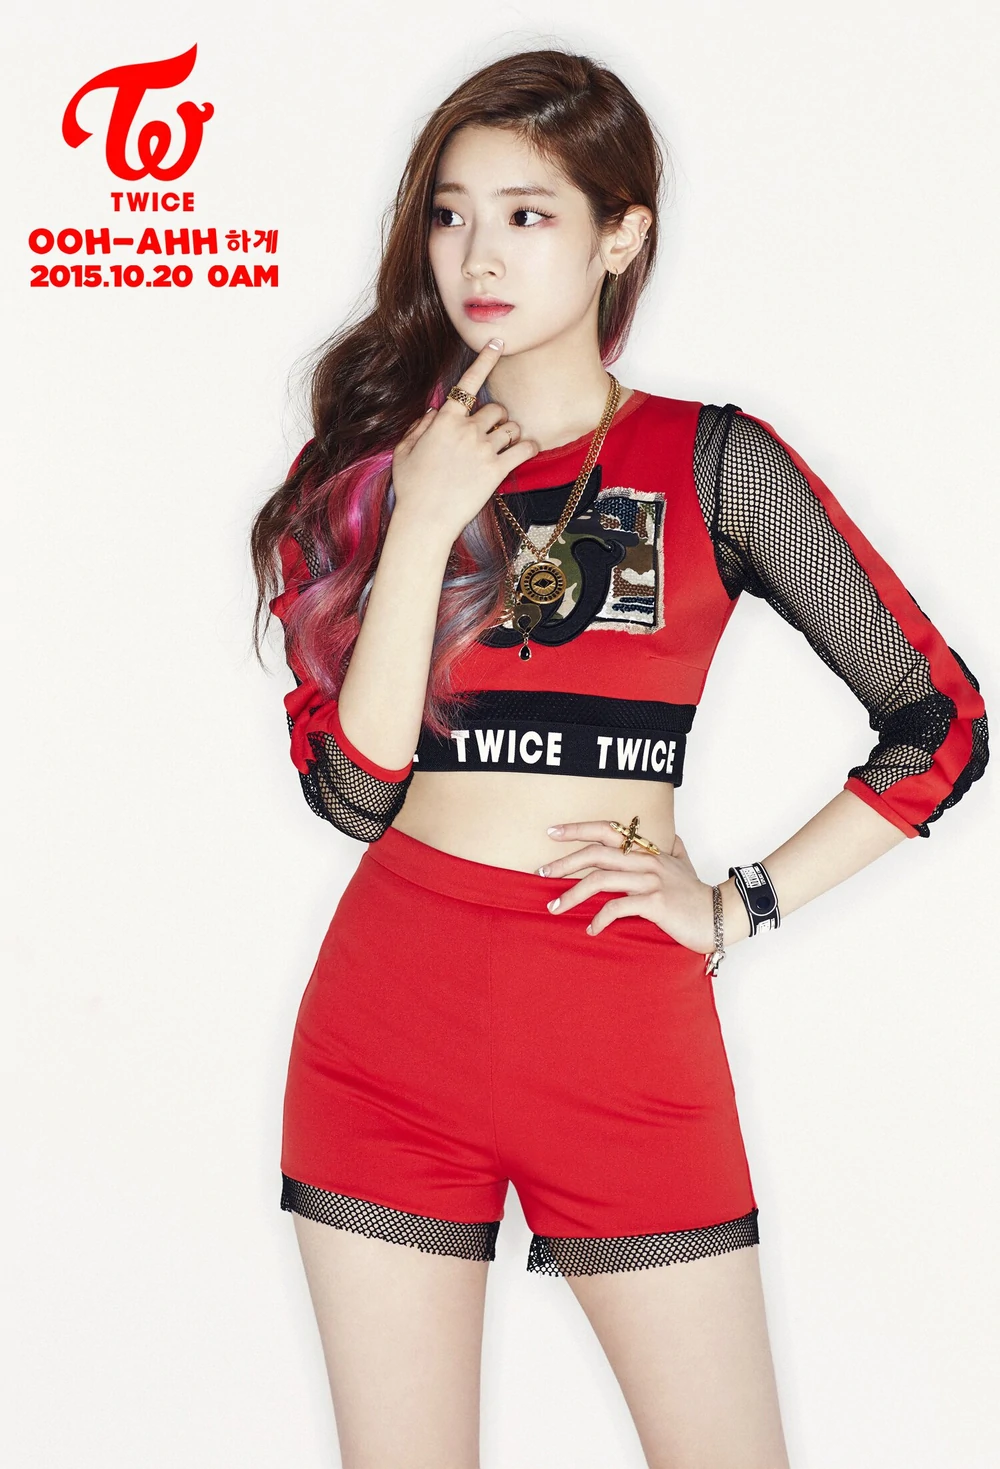 Twice The Story Begins Dahyun Concept Teaser Picture Image Photo Kpop K-Concept